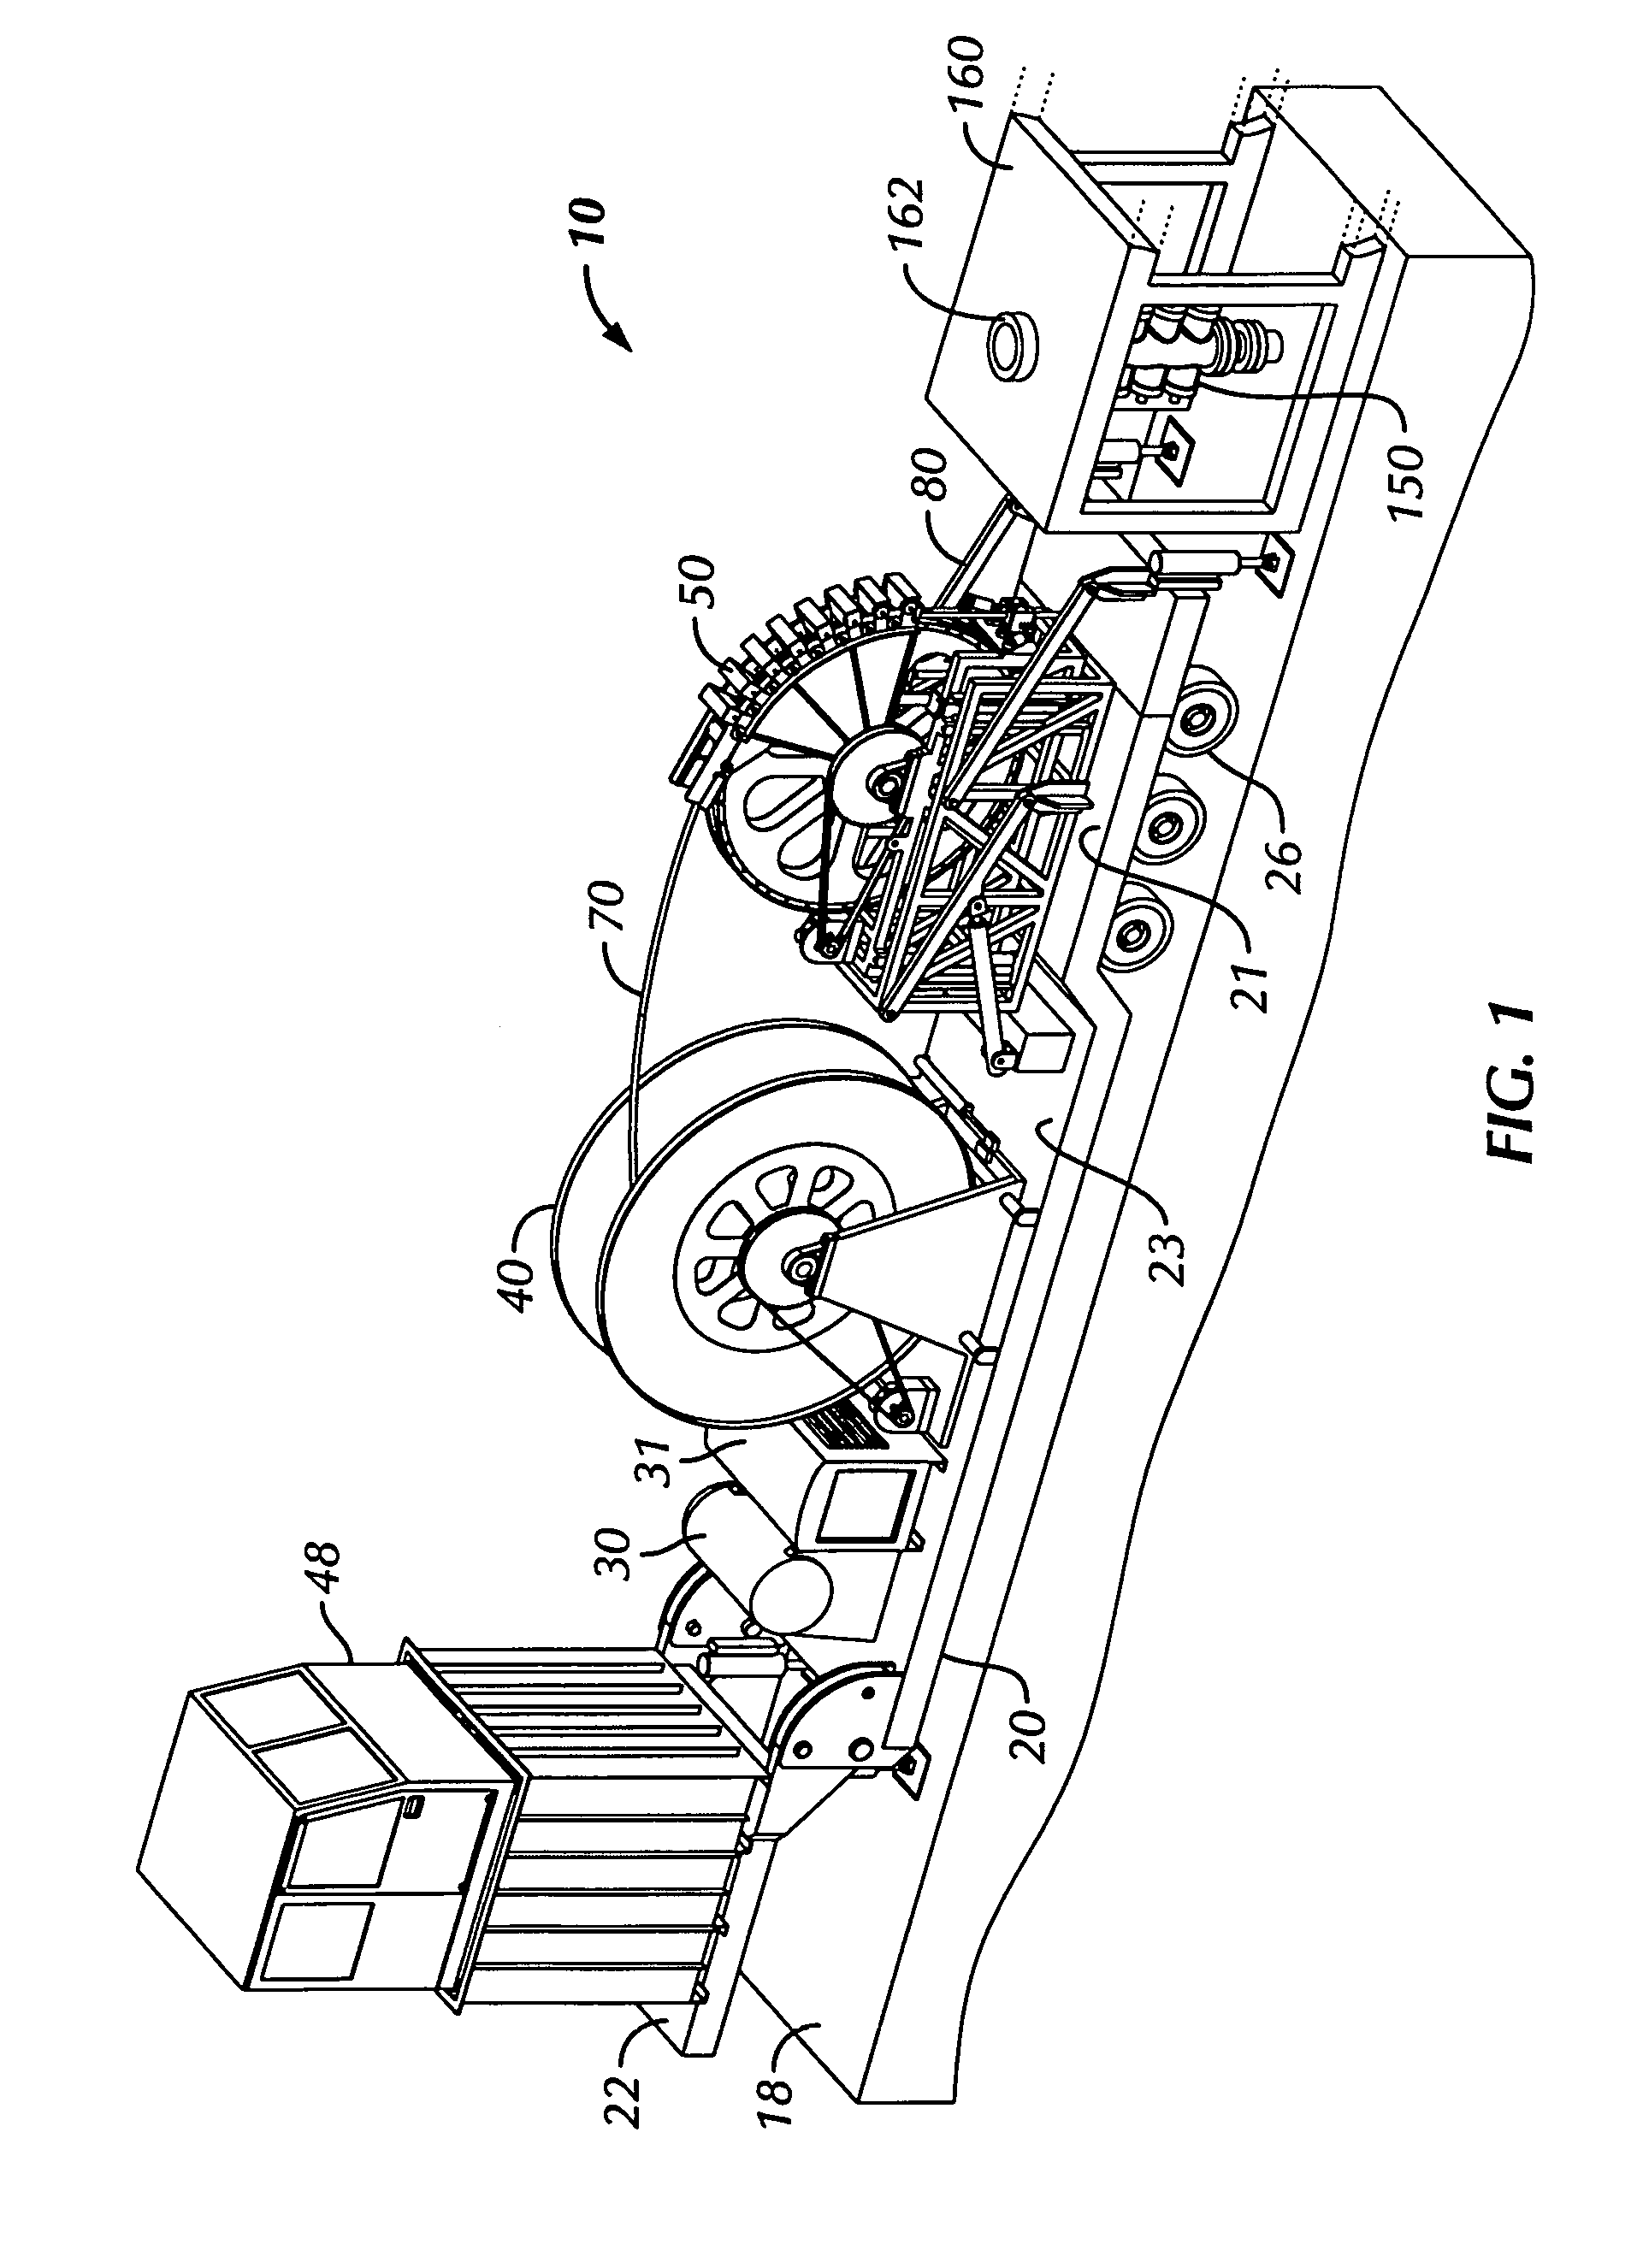 Selectably elevatable injector for coiled tubing